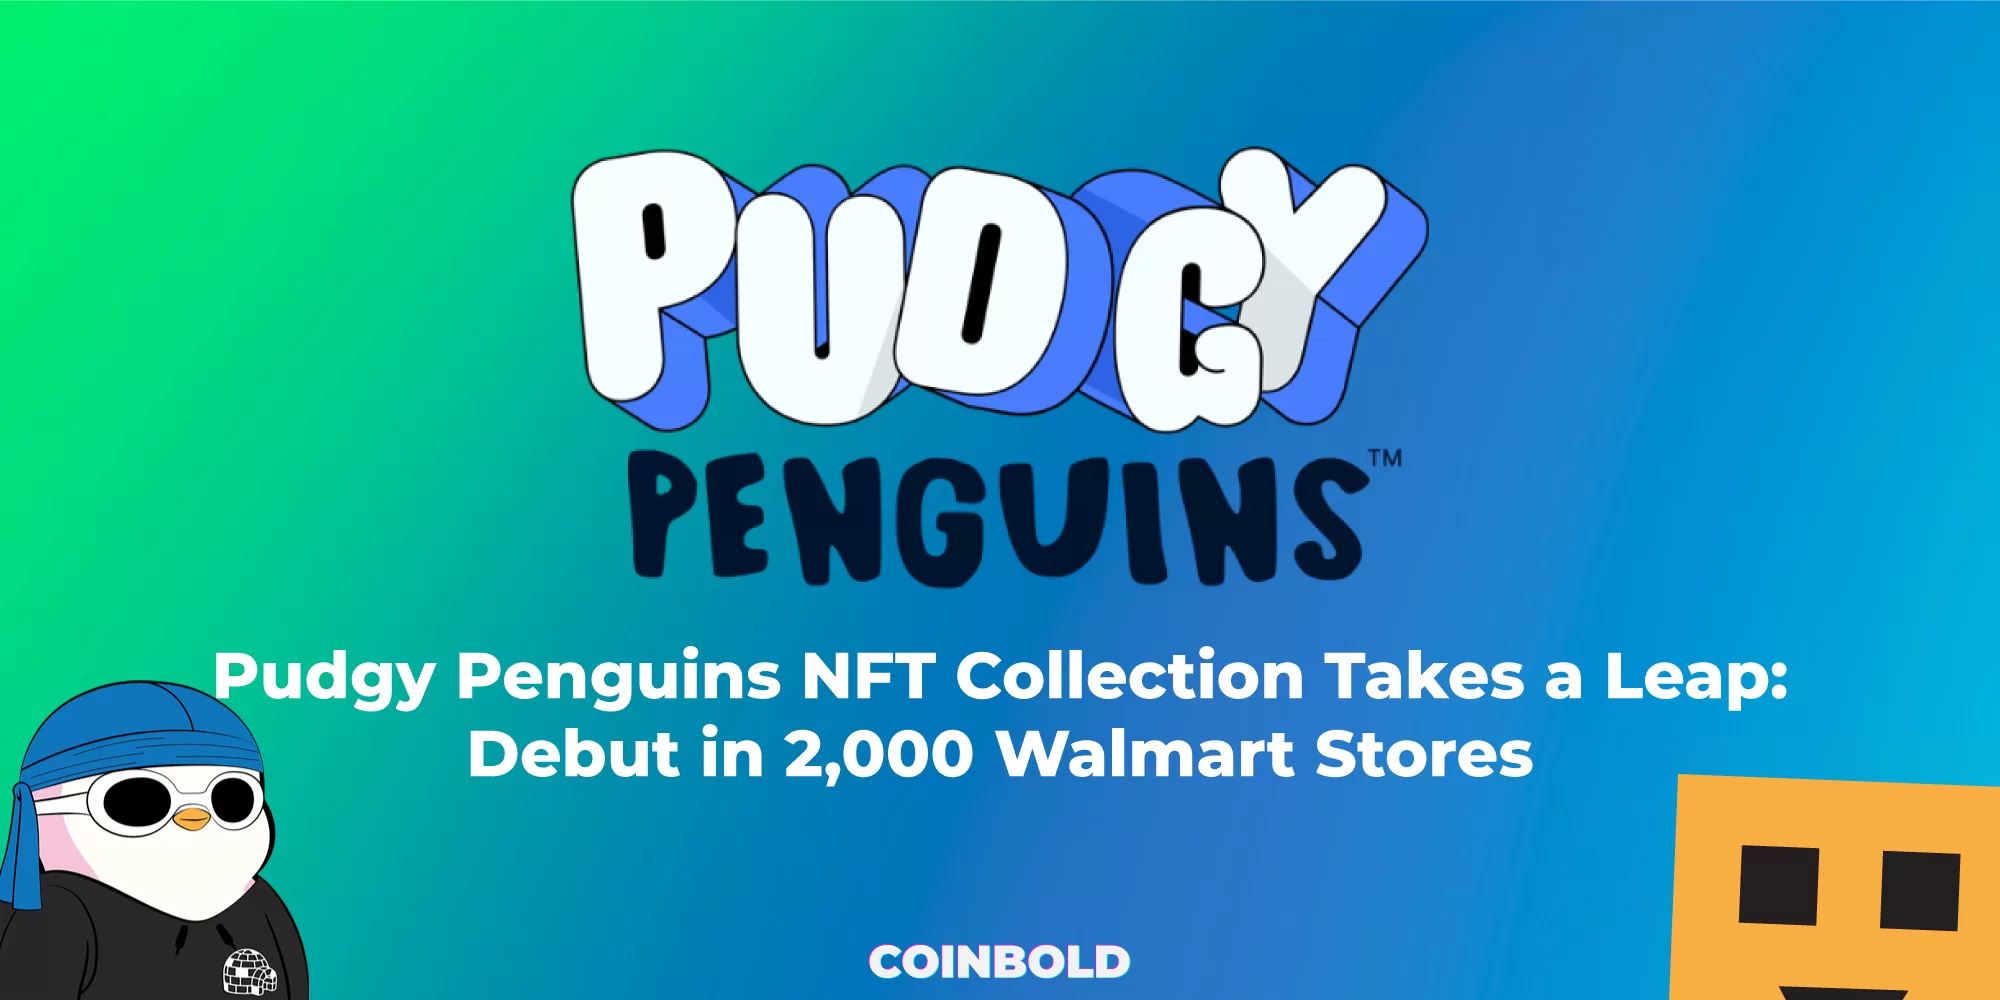 Pudgy Penguins NFT Collection Takes a Leap Debut in 2,000 Walmart Stores